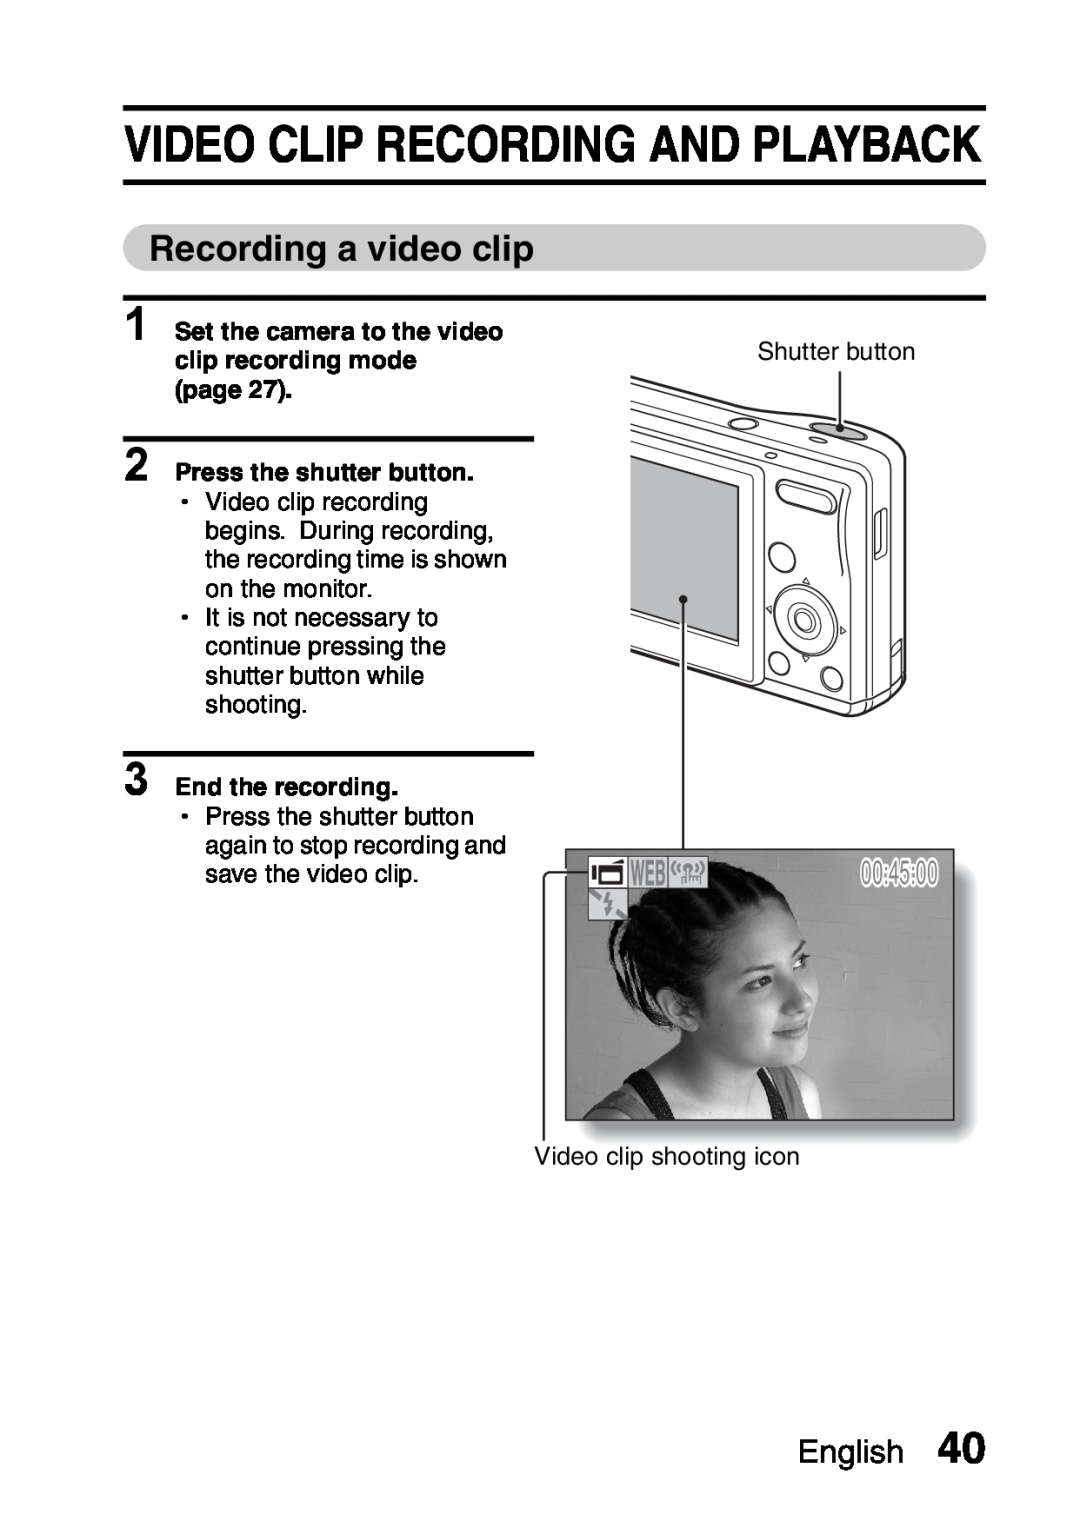 Sanyo VPC-S60 Video Clip Recording And Playback, Recording a video clip, End the recording, English, 004500 